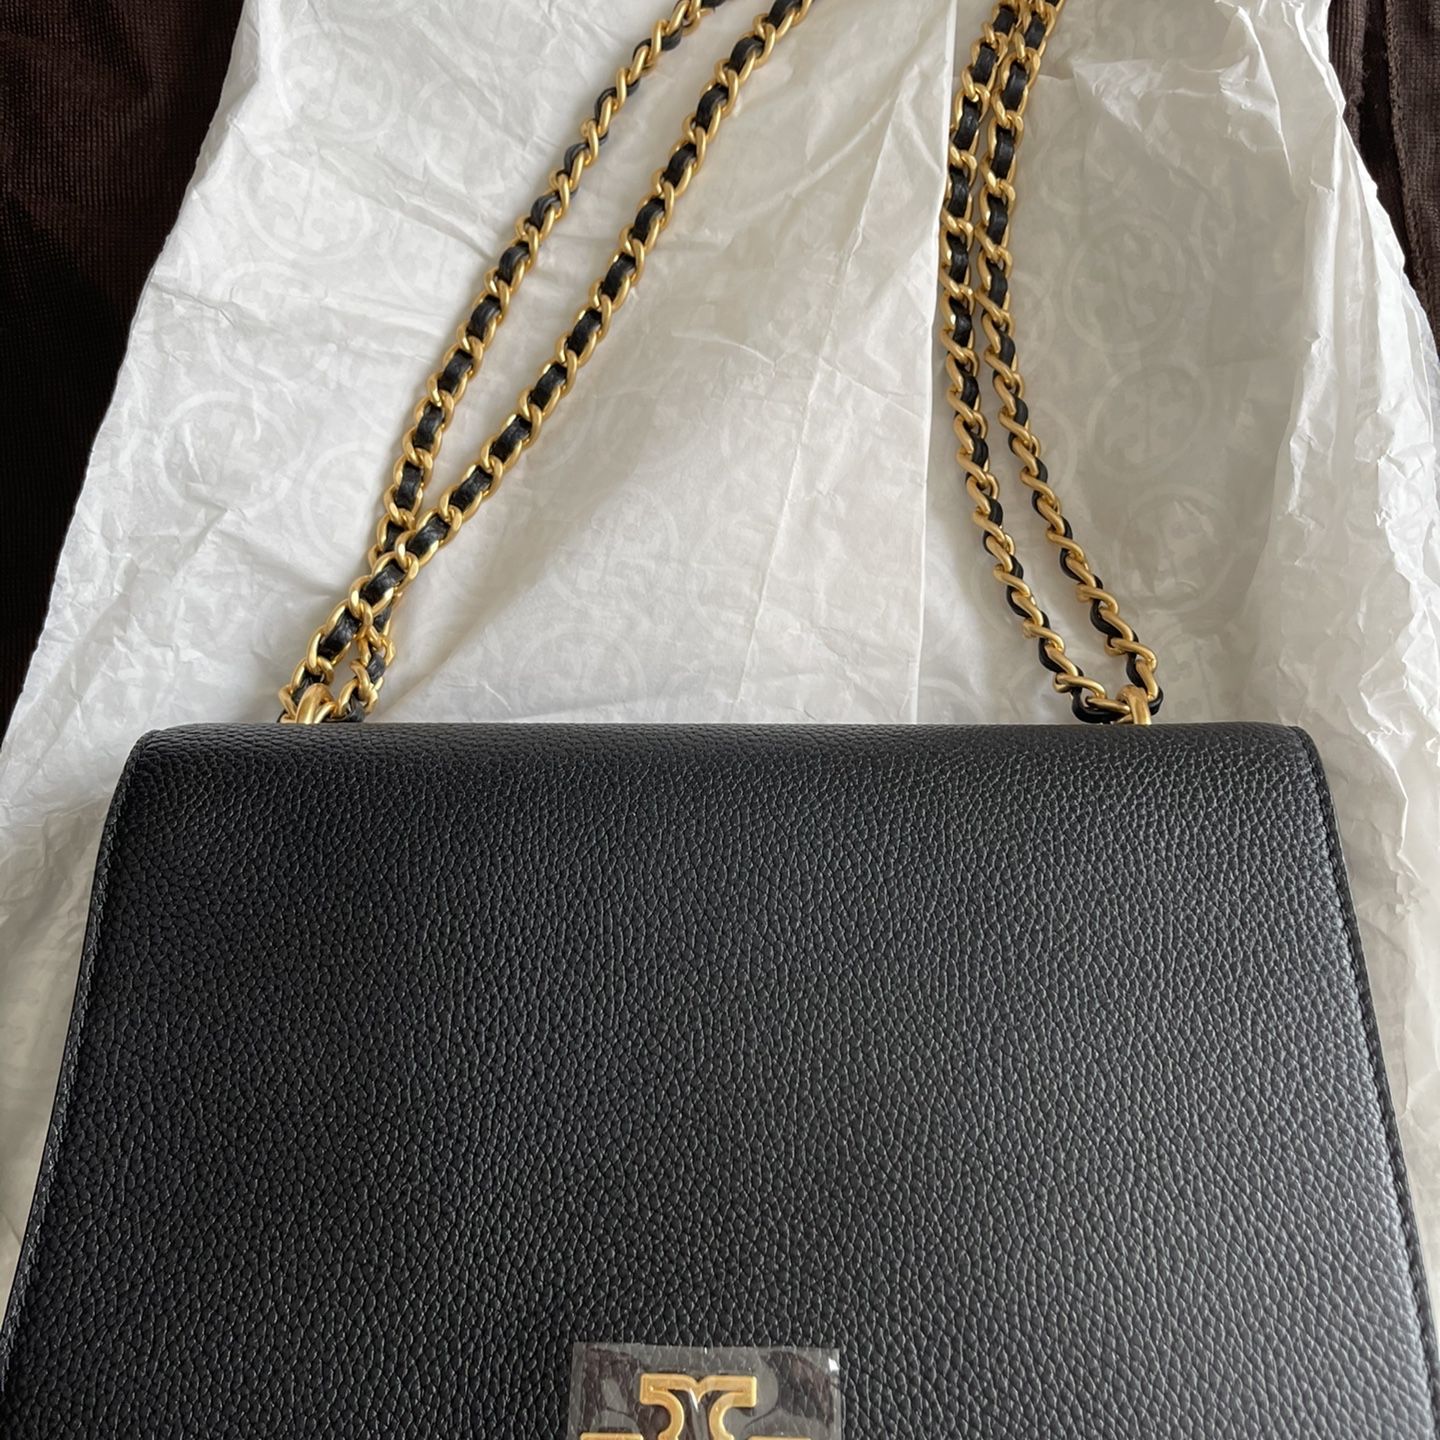 Tory Burch bag for Sale in Las Vegas, NV - OfferUp